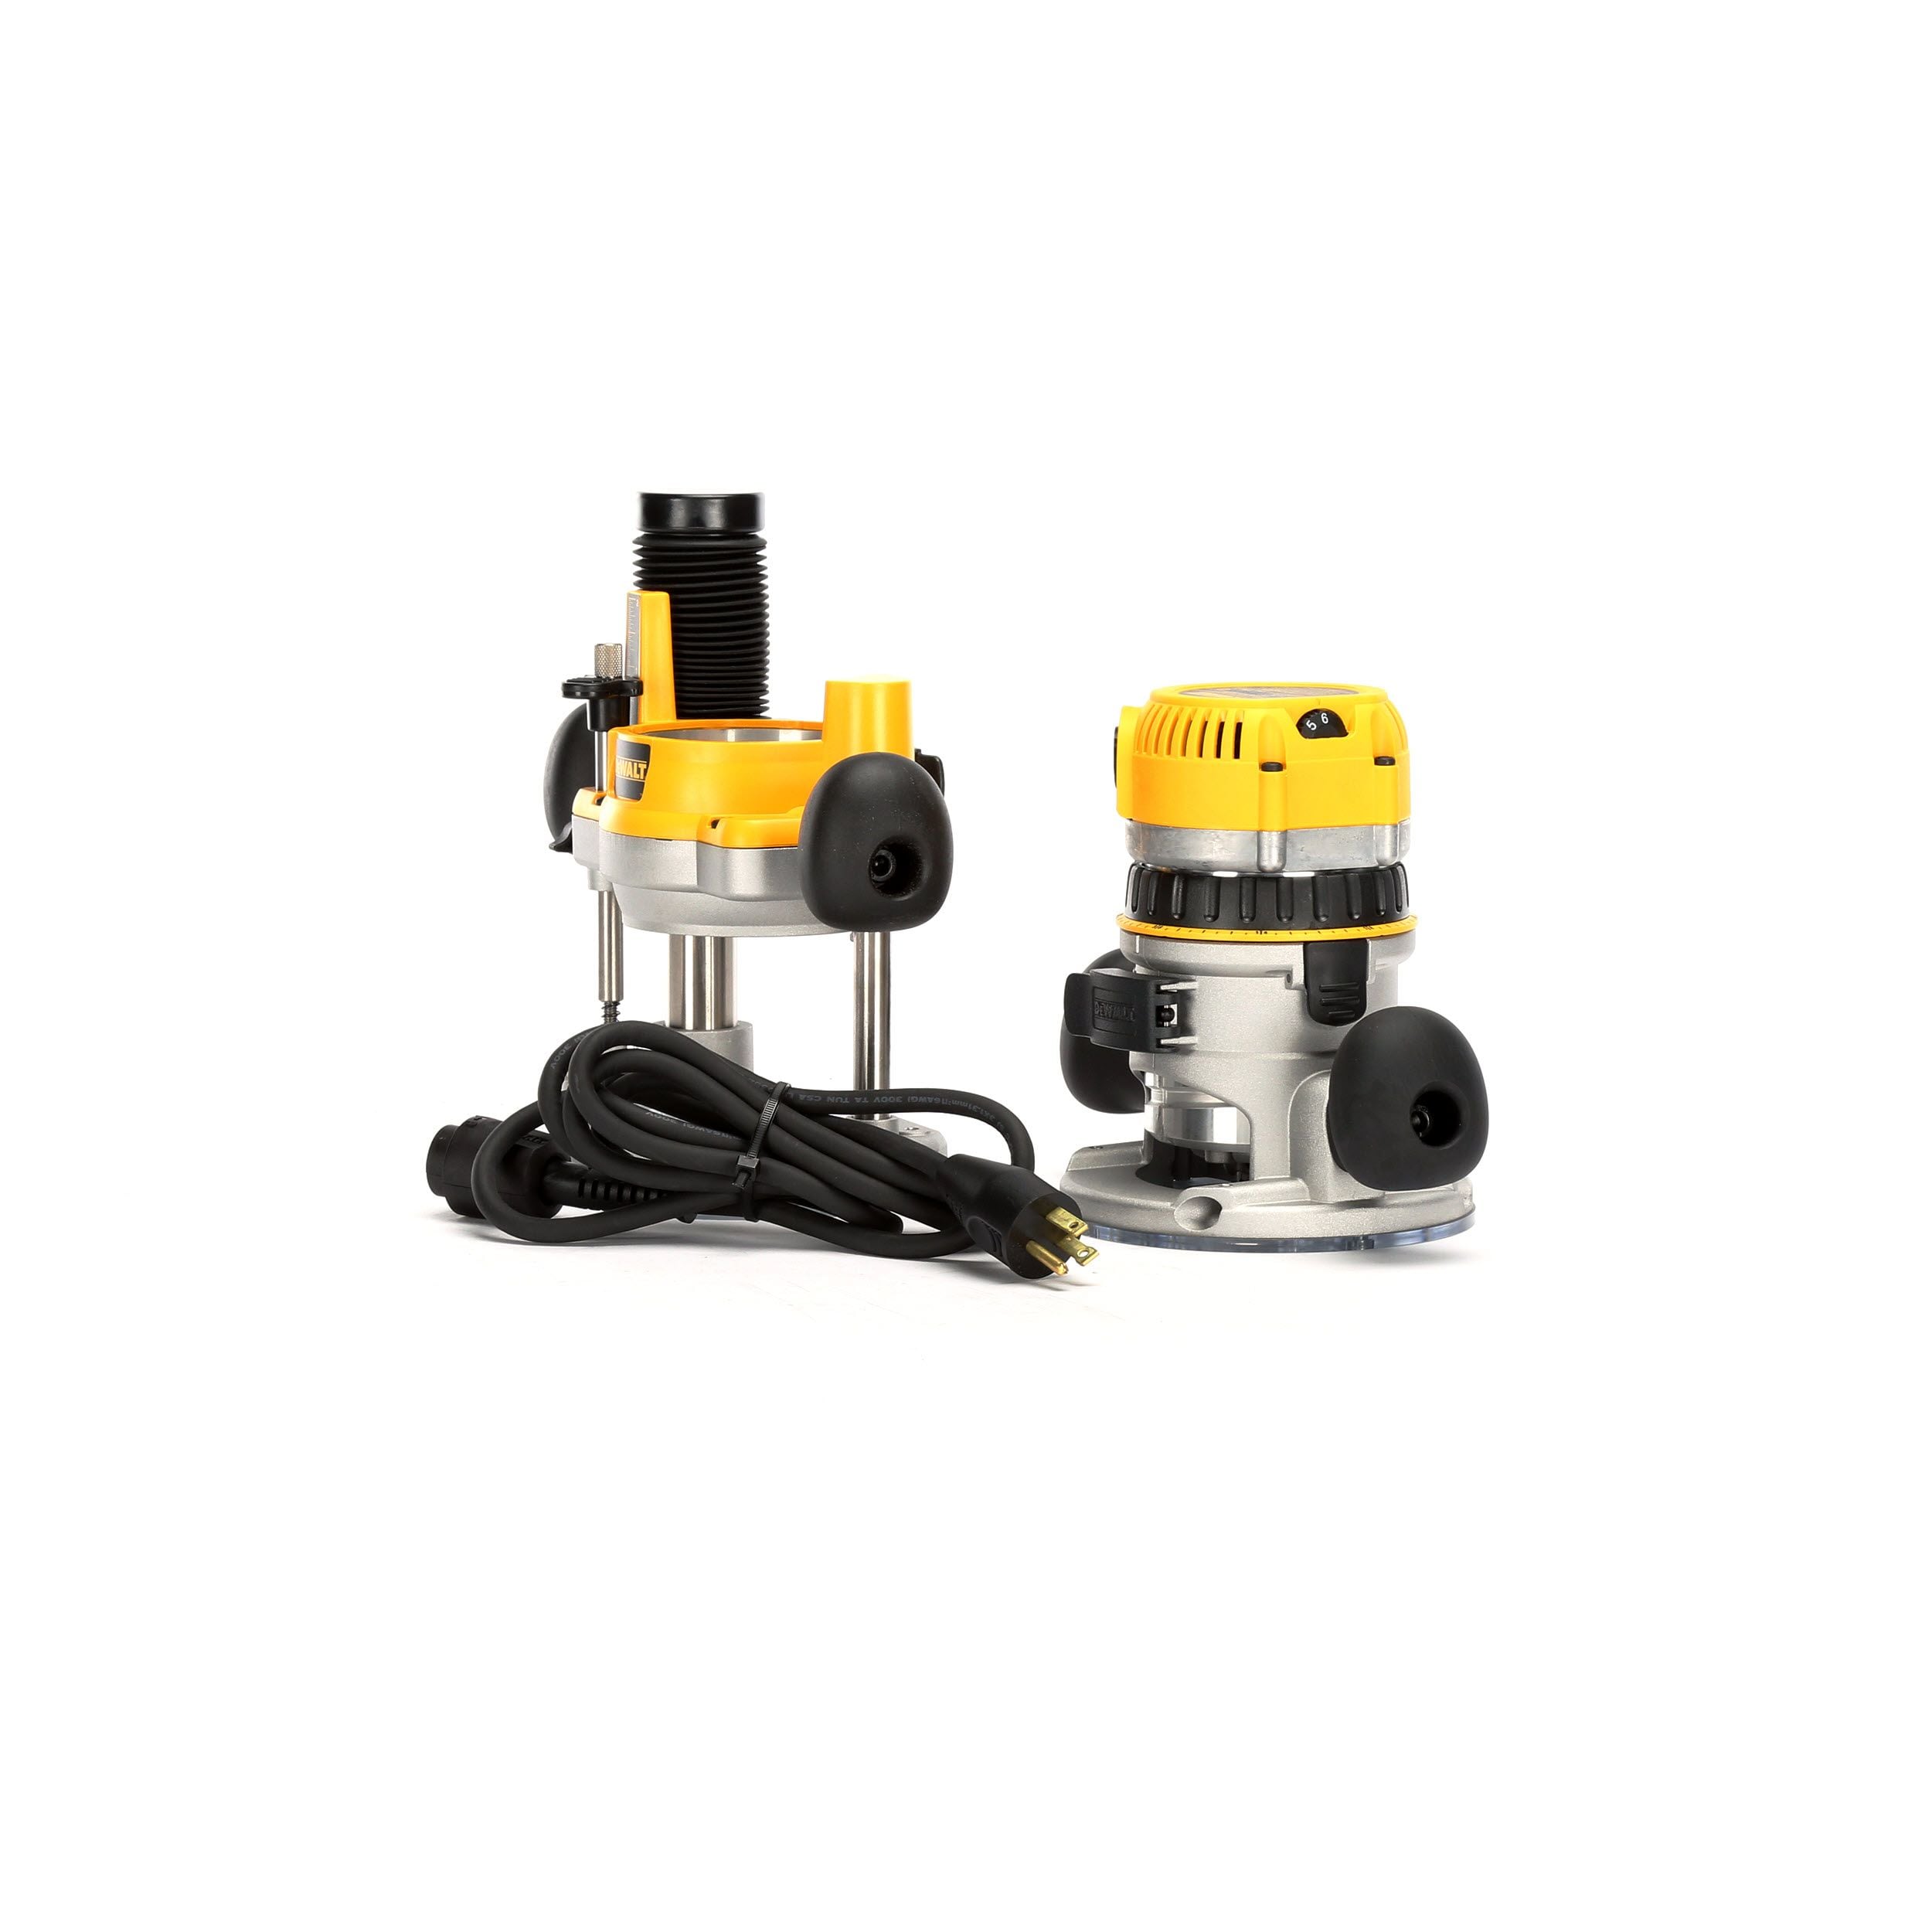 DEWALT Router Kit 2 1/4 HP 12 Amp Plunge and Fixed Base Variable Speed 8 to 24k for sale online